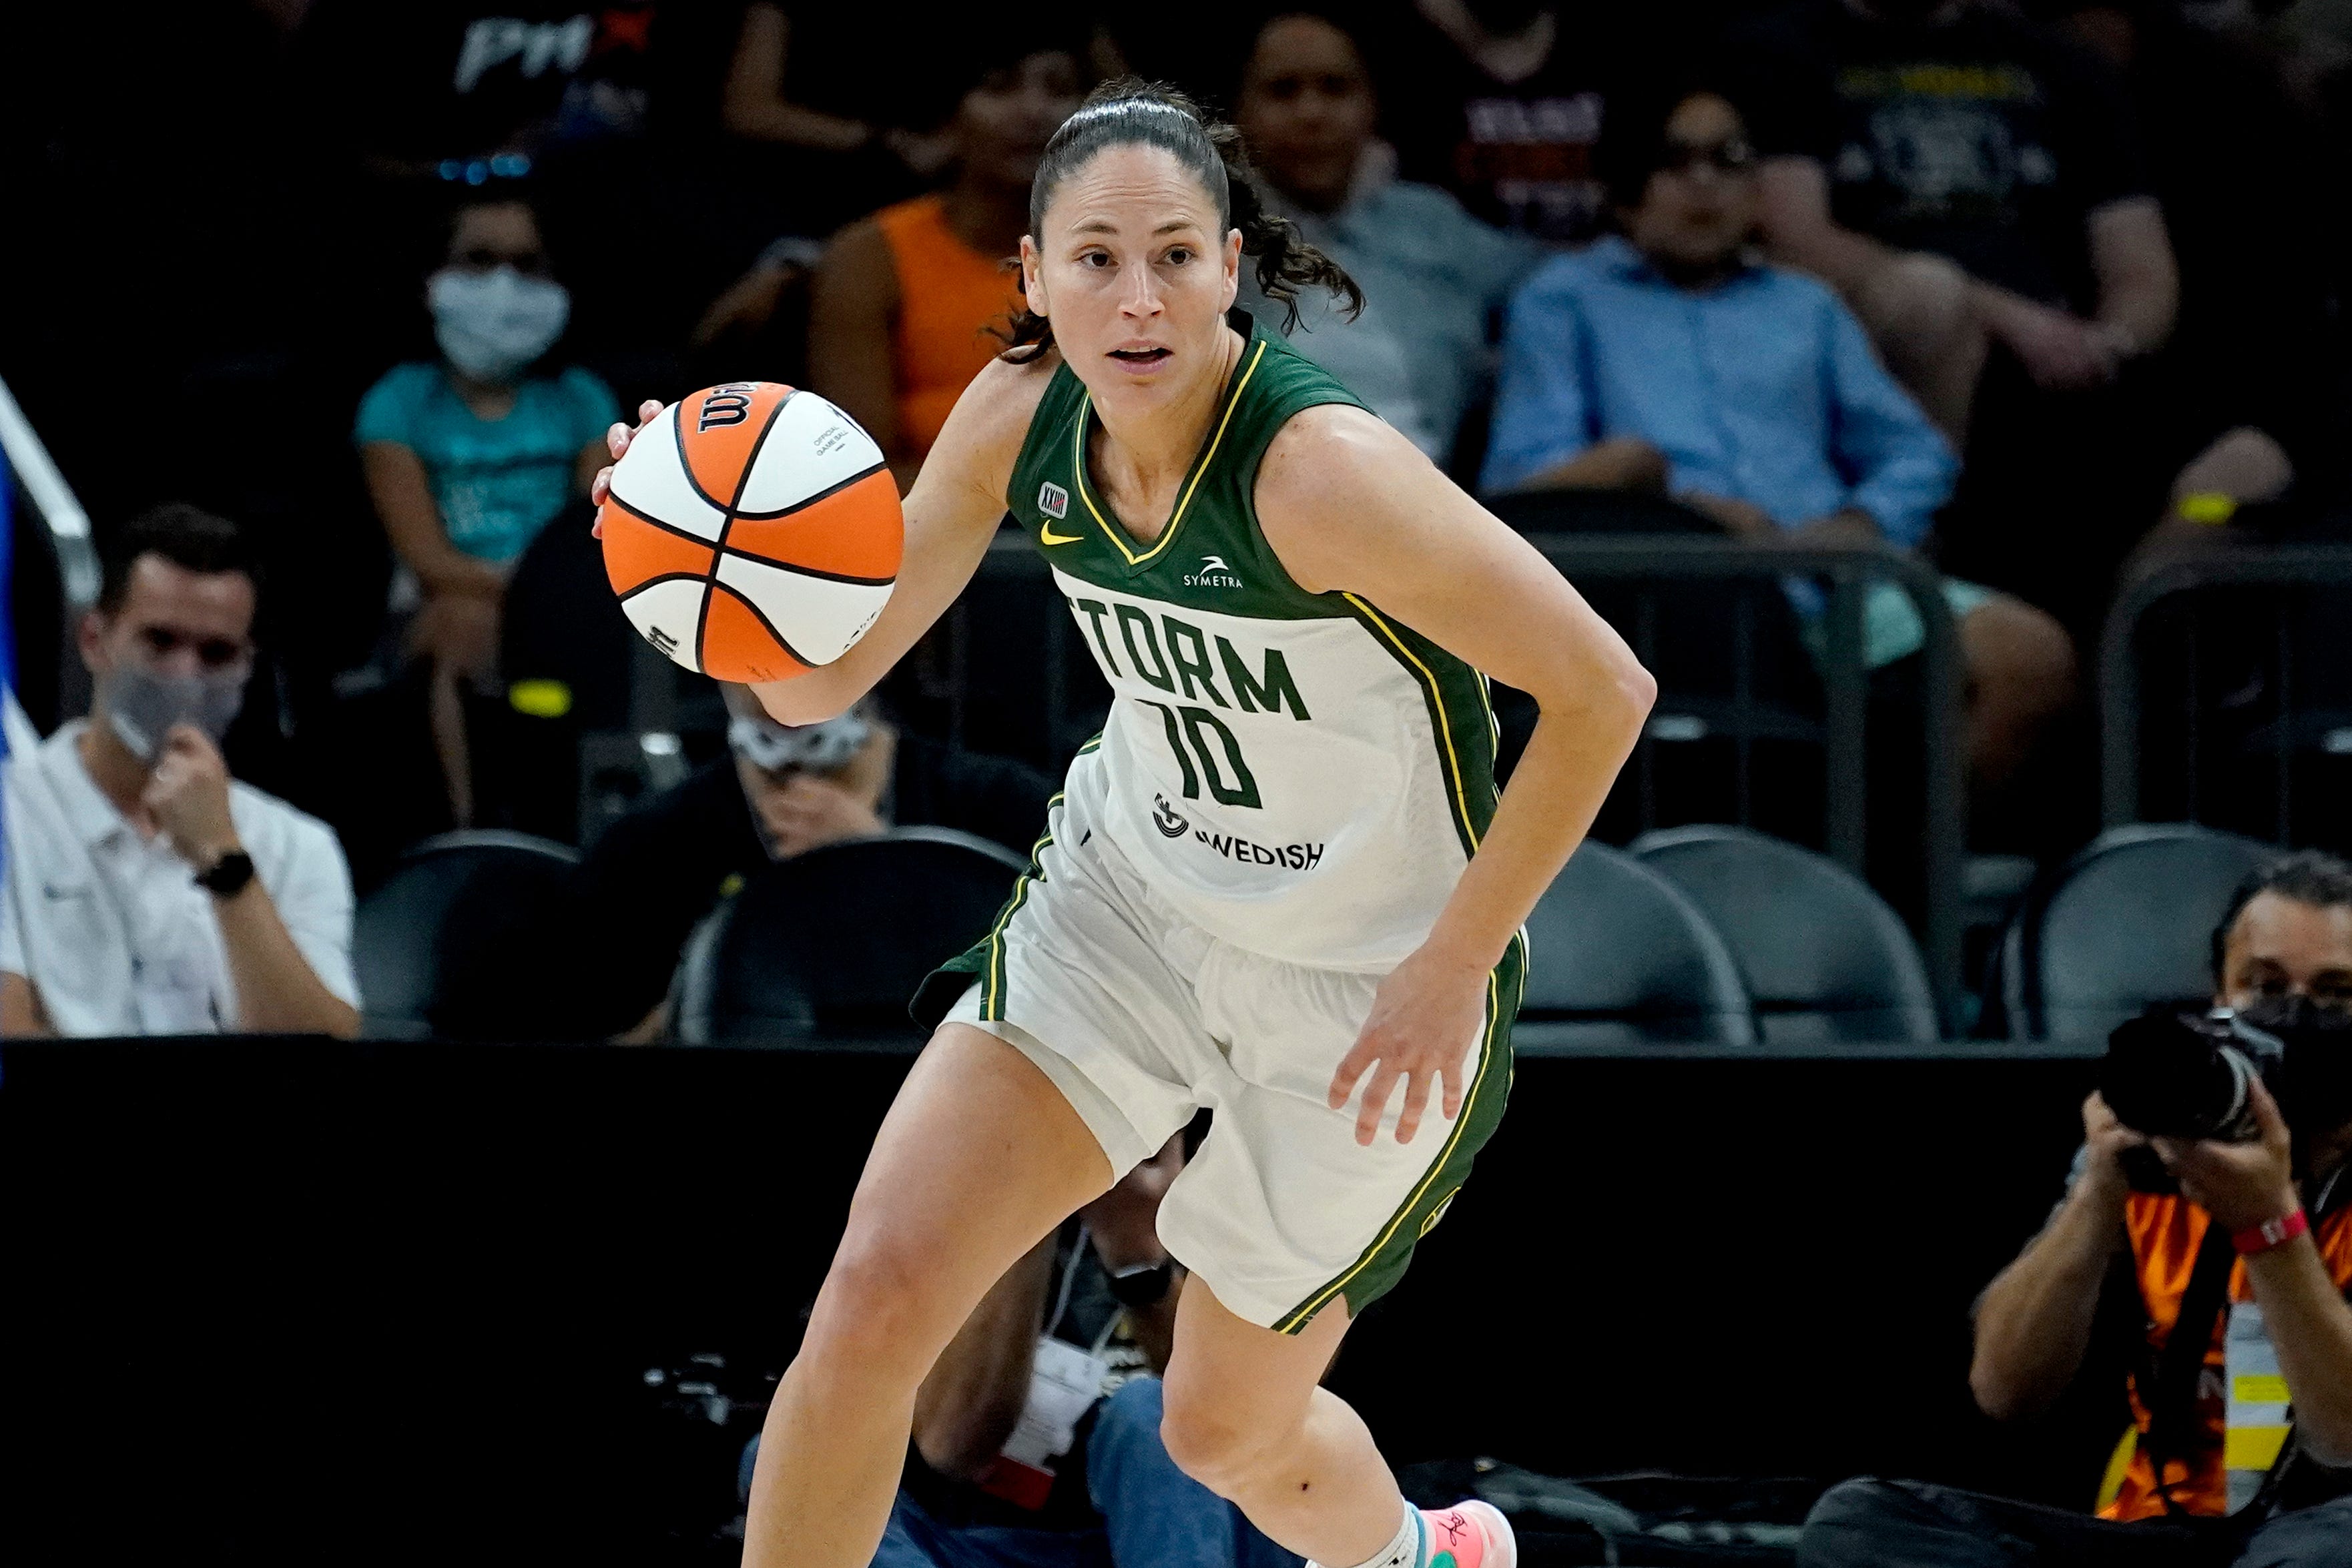 WNBA star Sue Bird puts off retirement, says she's returning to Seattle Storm in 2022